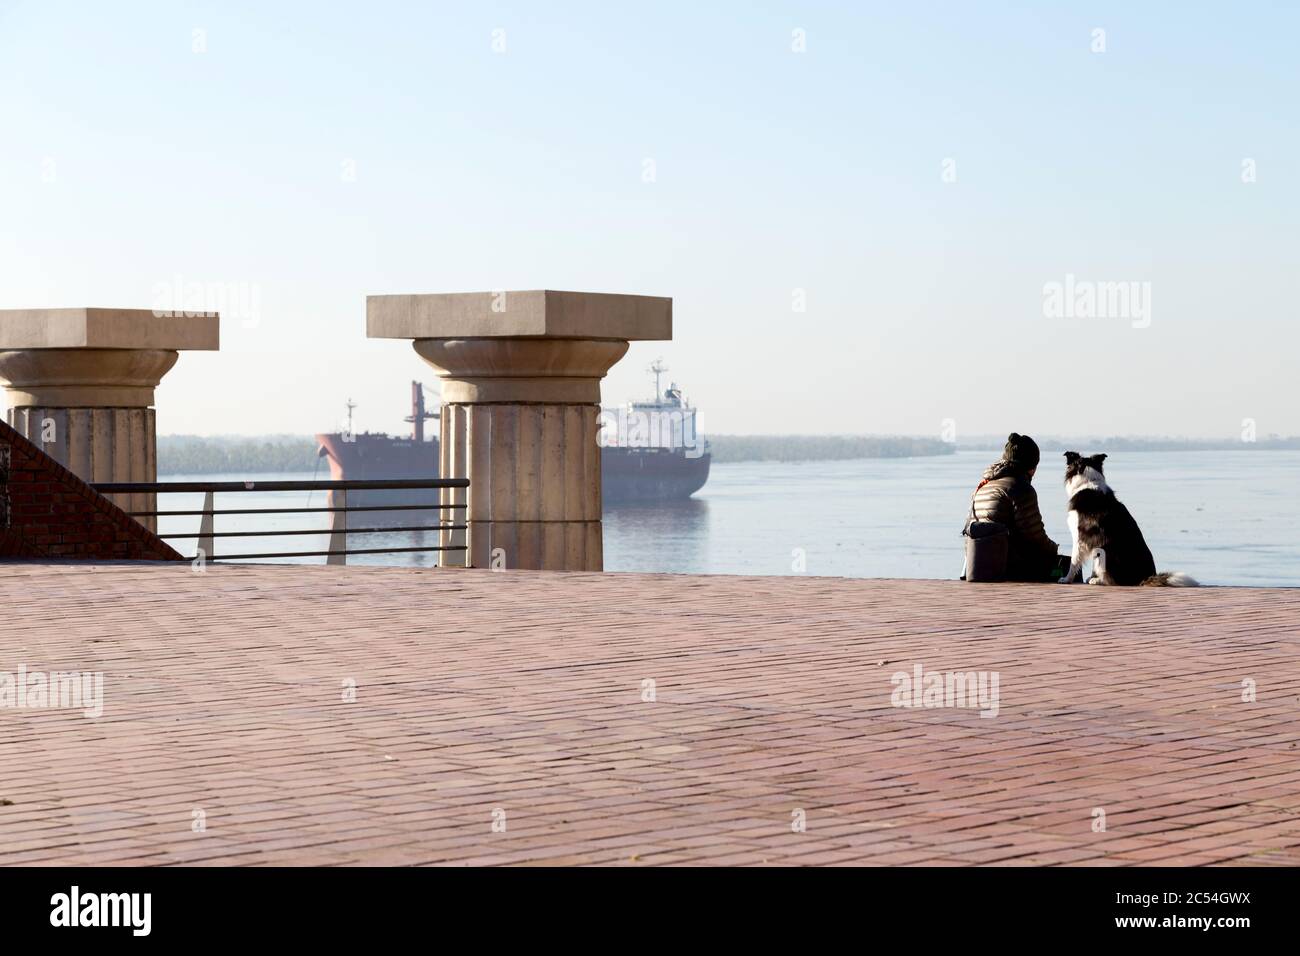 ROSARIO, ARGENTINA - JULY 16, 2019: Scene of man with his dog in the Spain Park. The parana river and a cargo ship at the background. Stock Photo